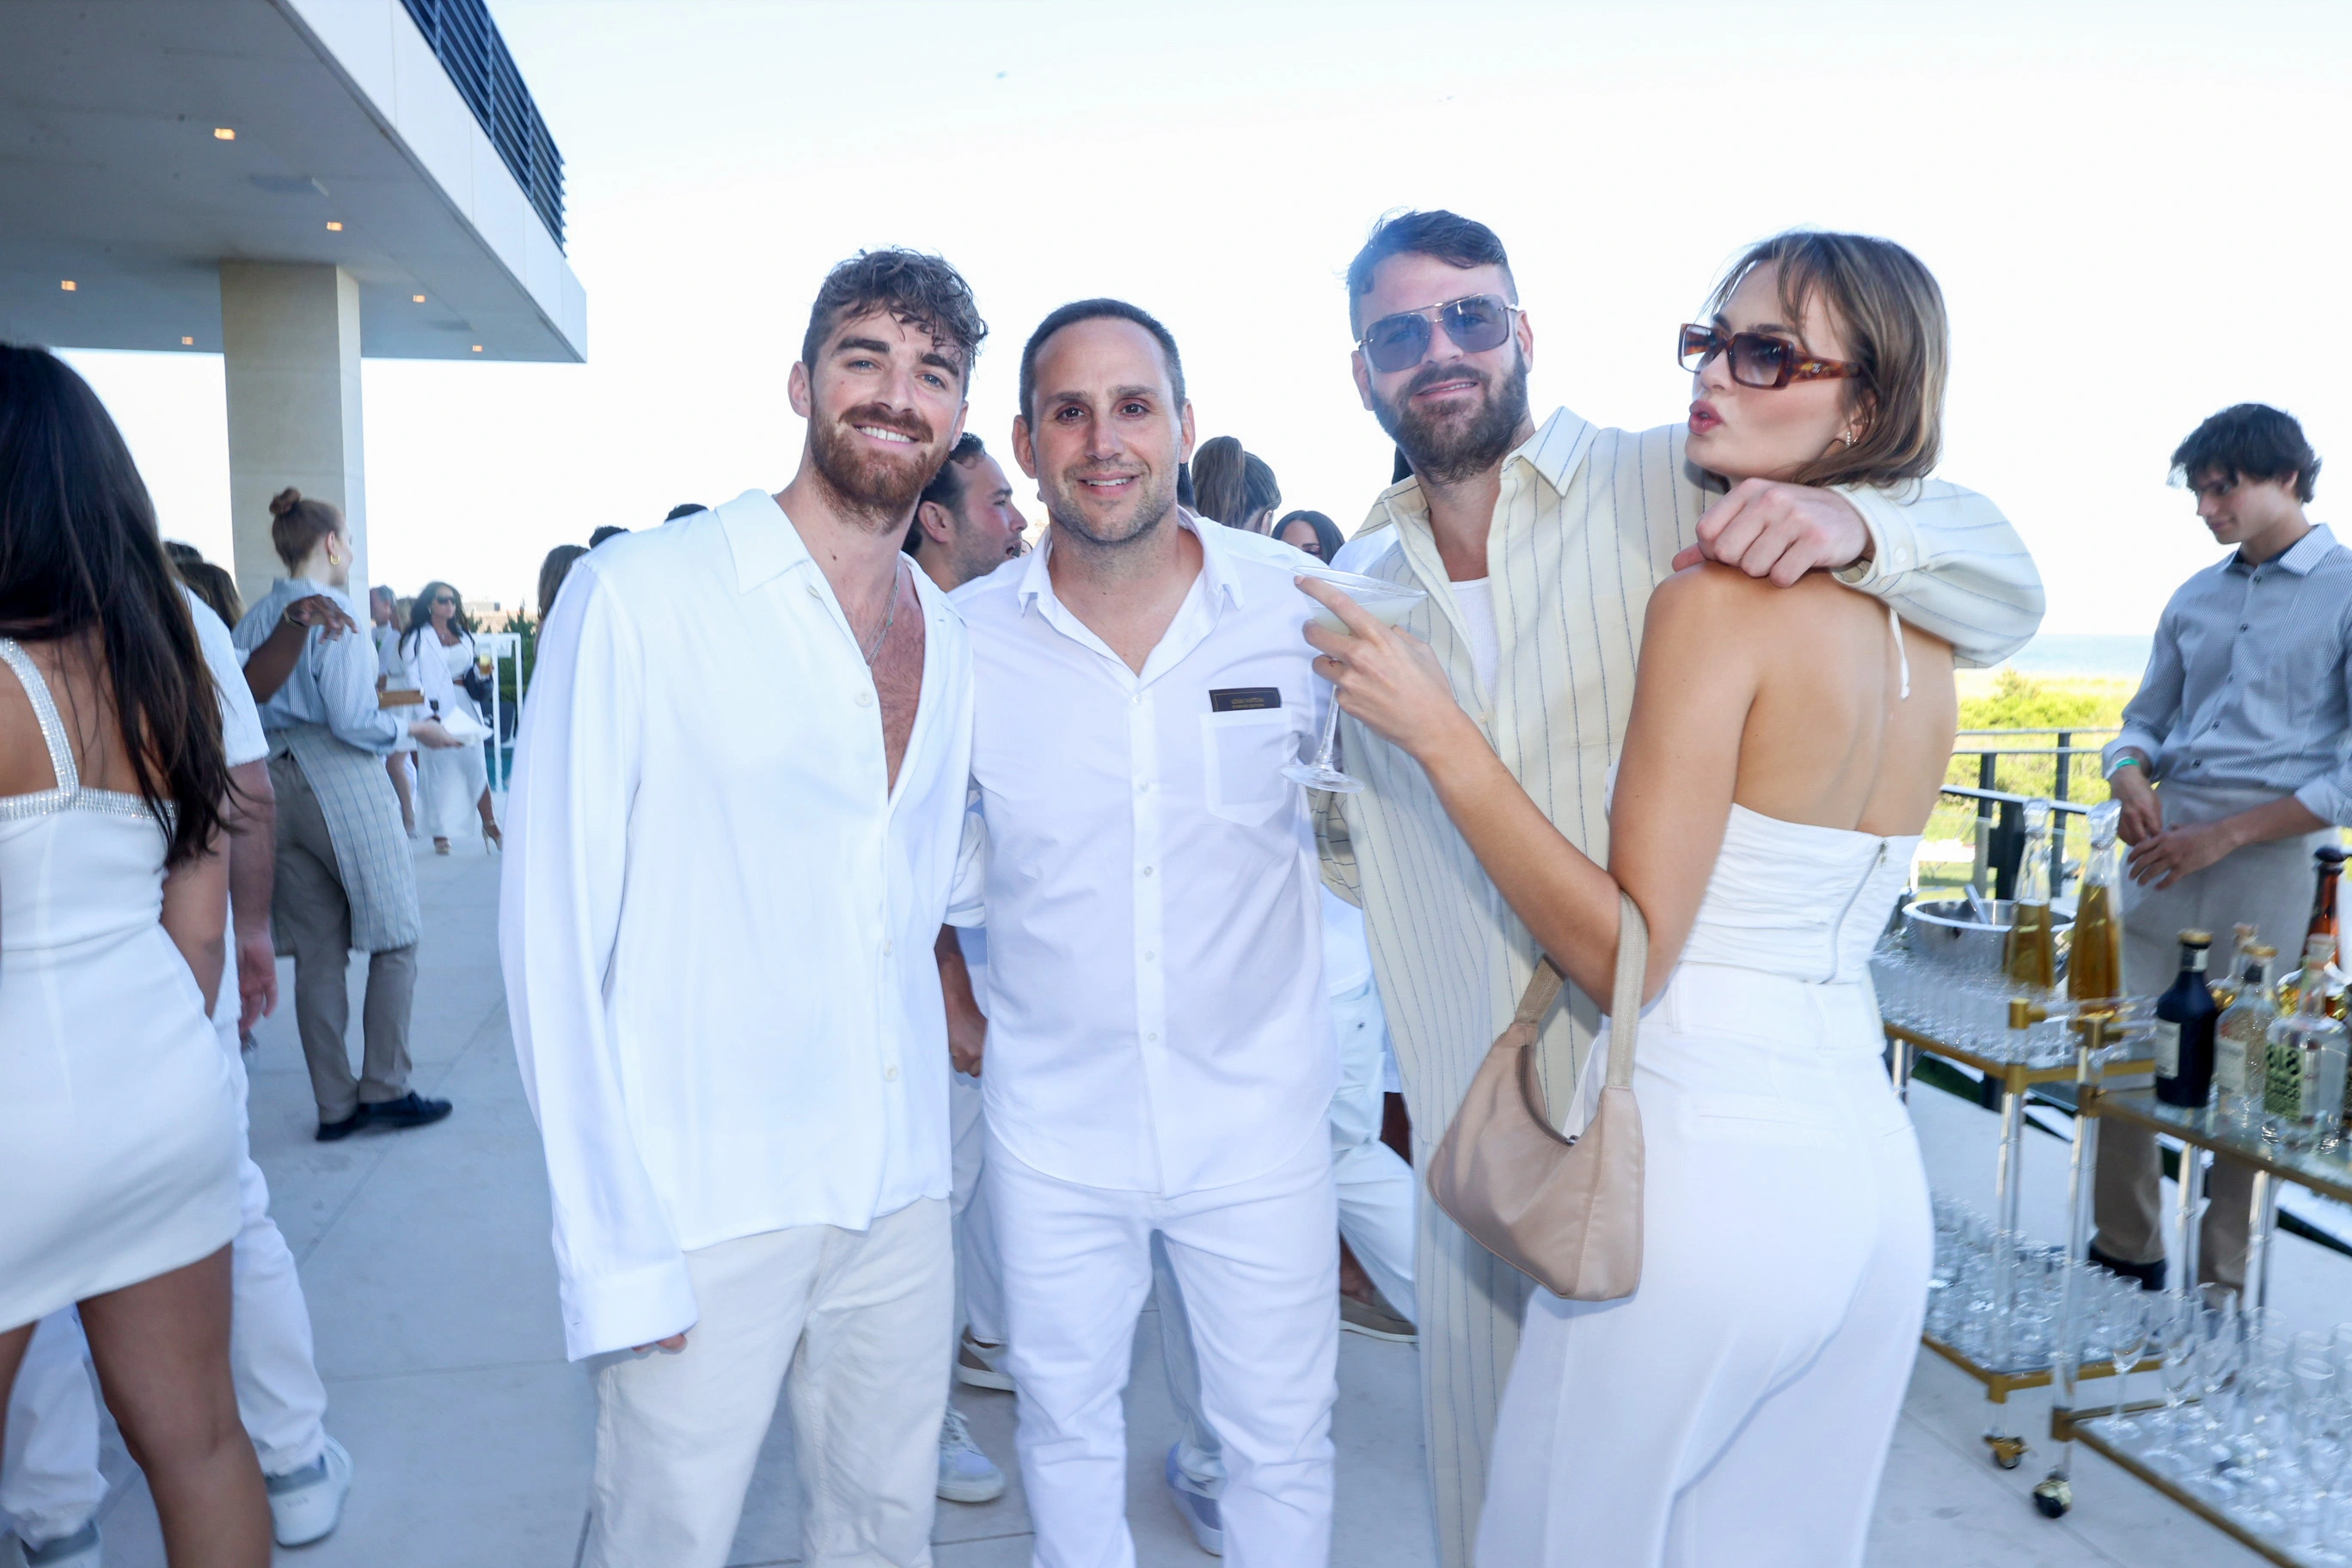 Watches at Michael Rubin Hamptons White Party – IFL Watches